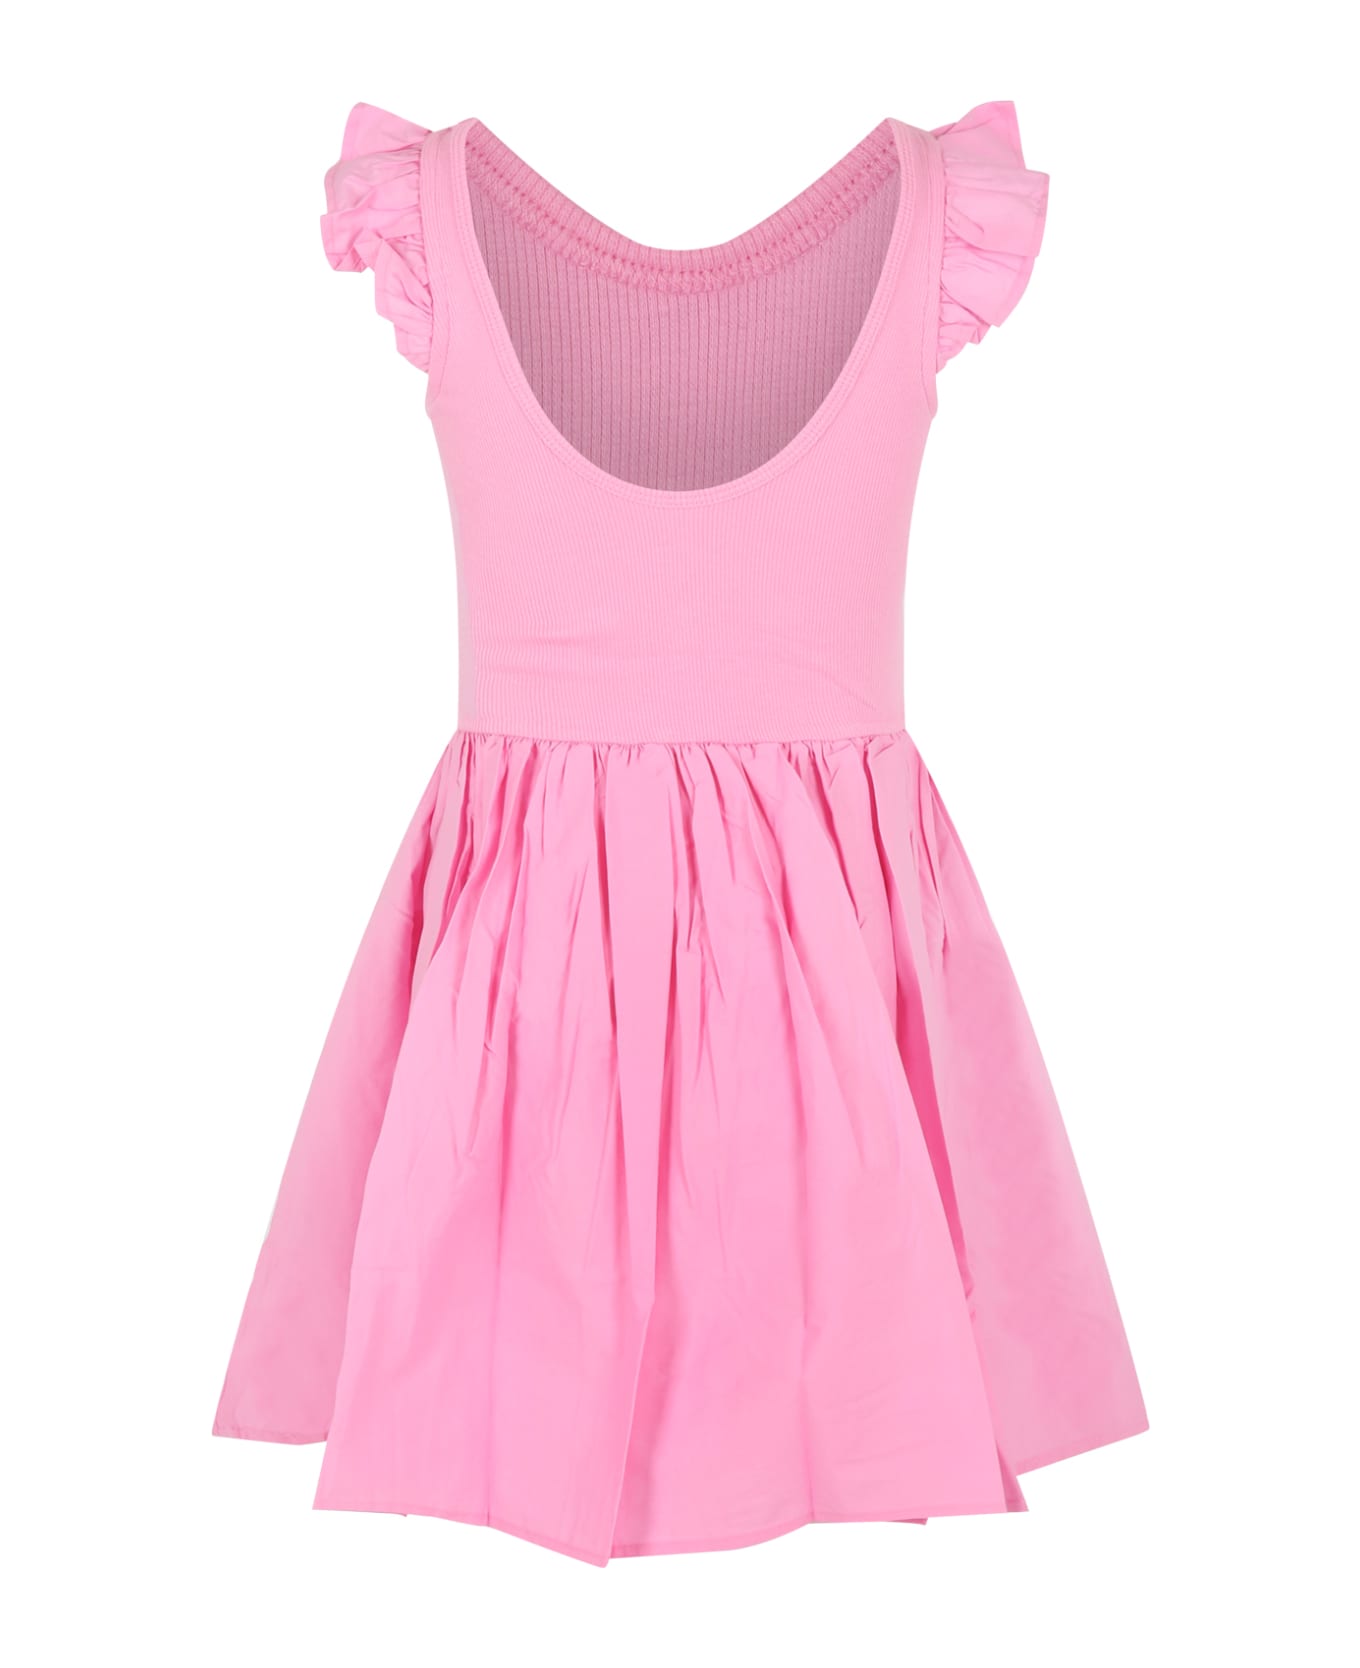 Molo Pink Dress For Girl With Logo Patch - Pink